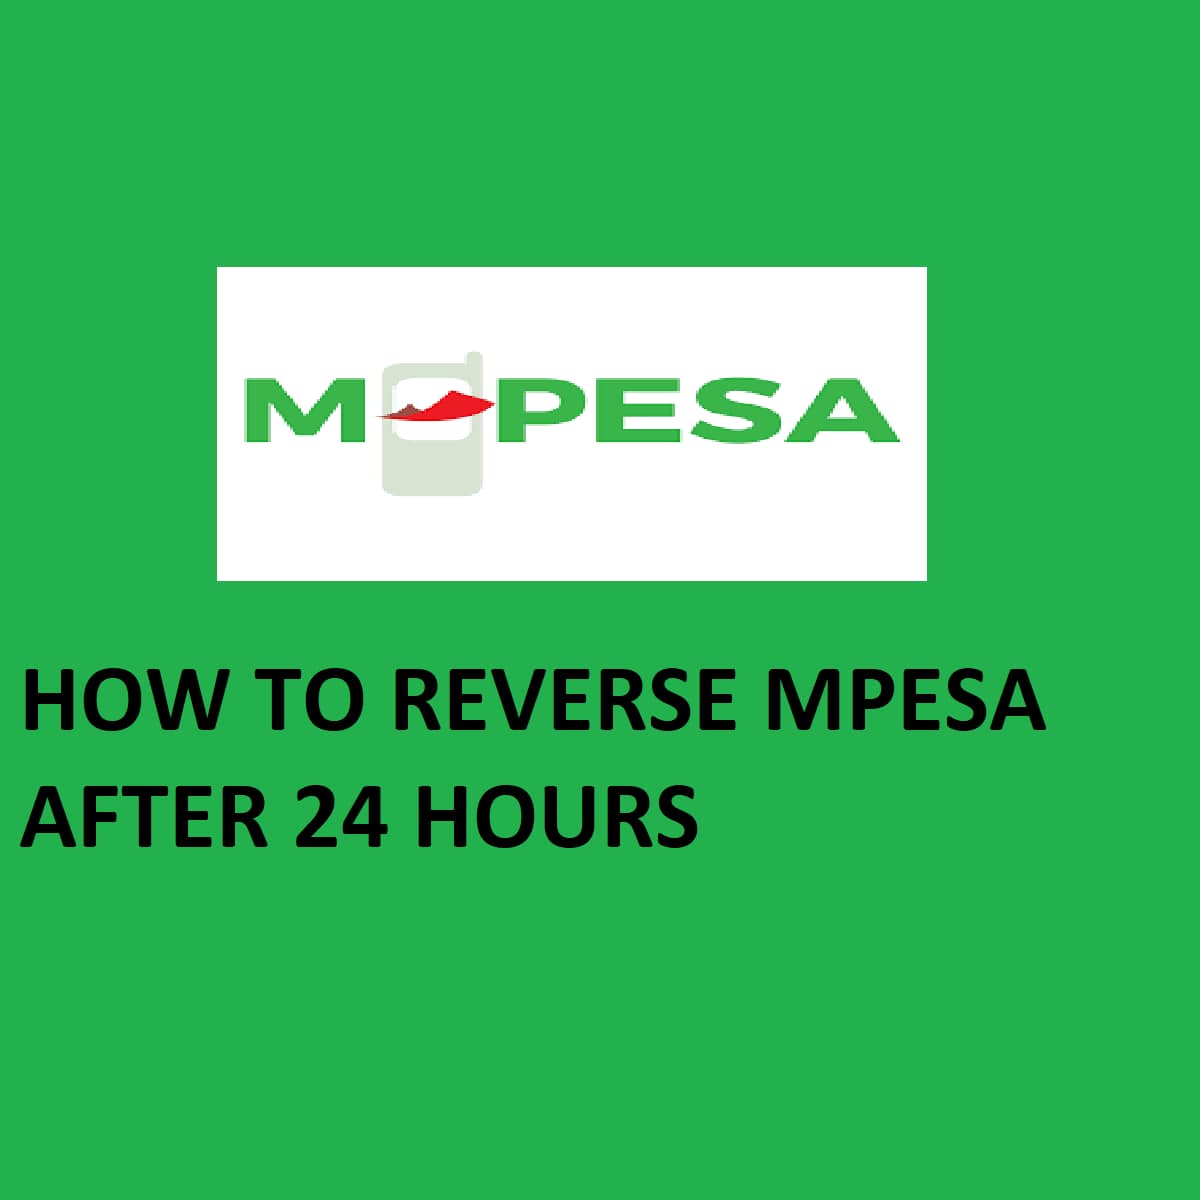 How to Reverse Mpesa after 24 Hours